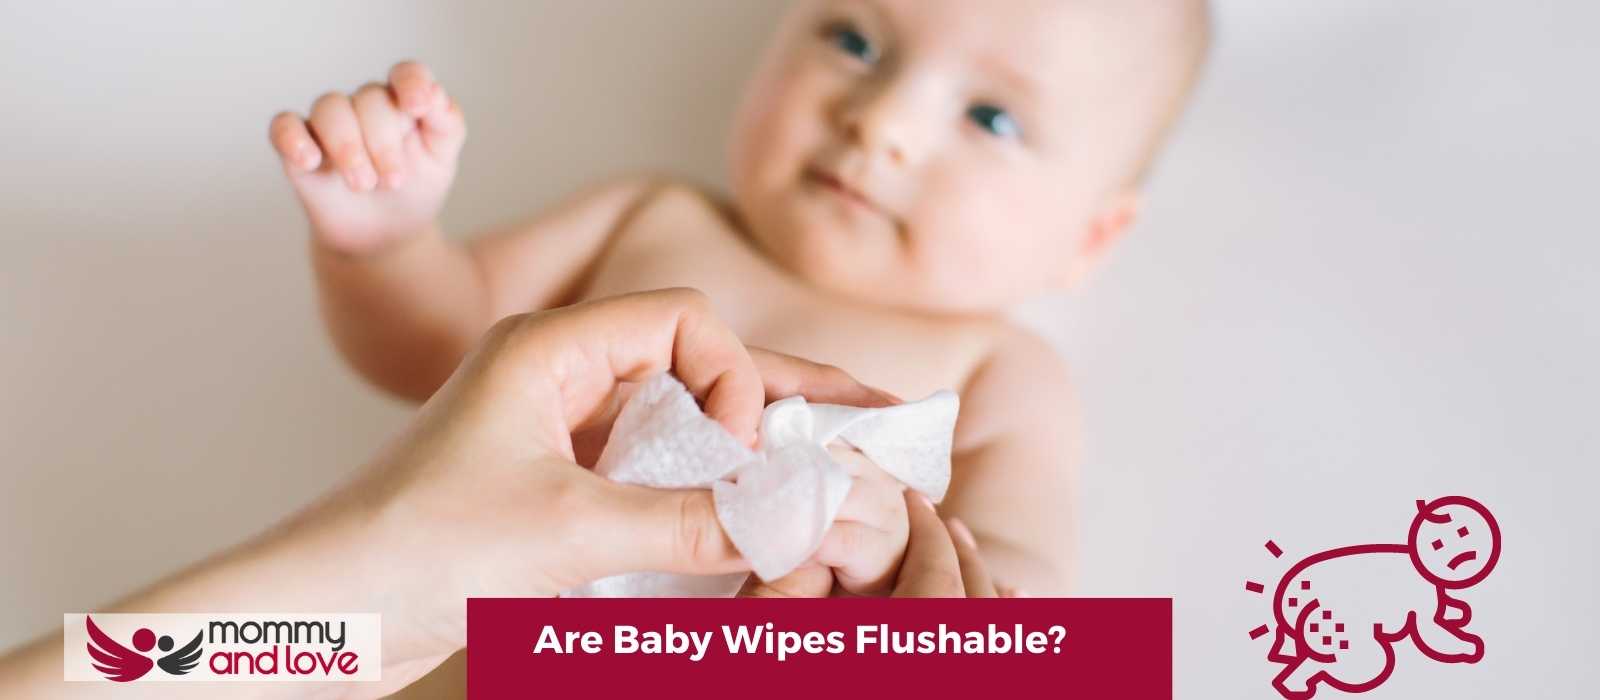 Are Baby Wipes Flushable